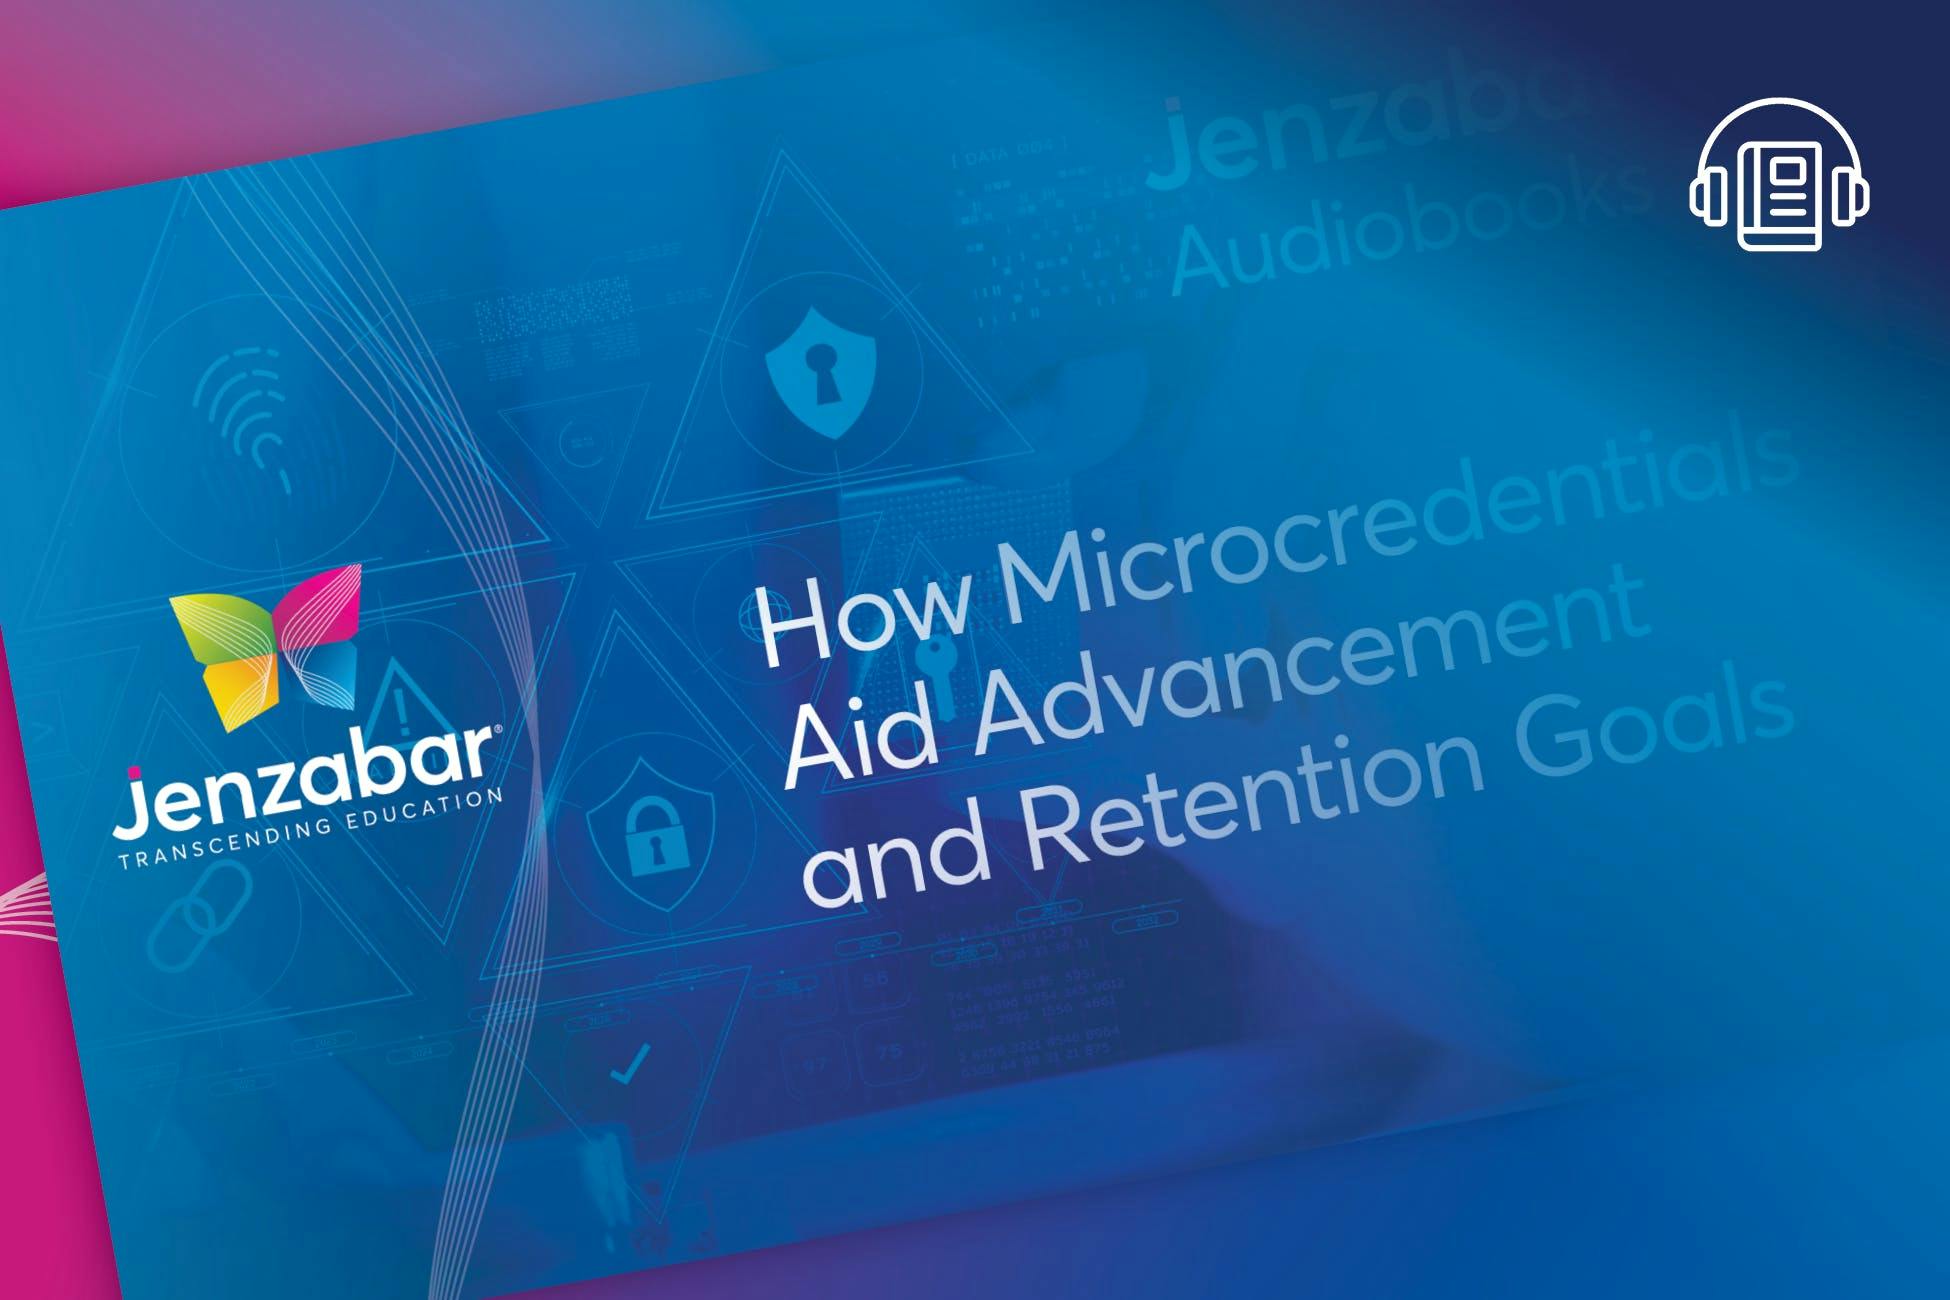 Audiobook: How Micro-Credentials Aid Retention and Advancement Goals